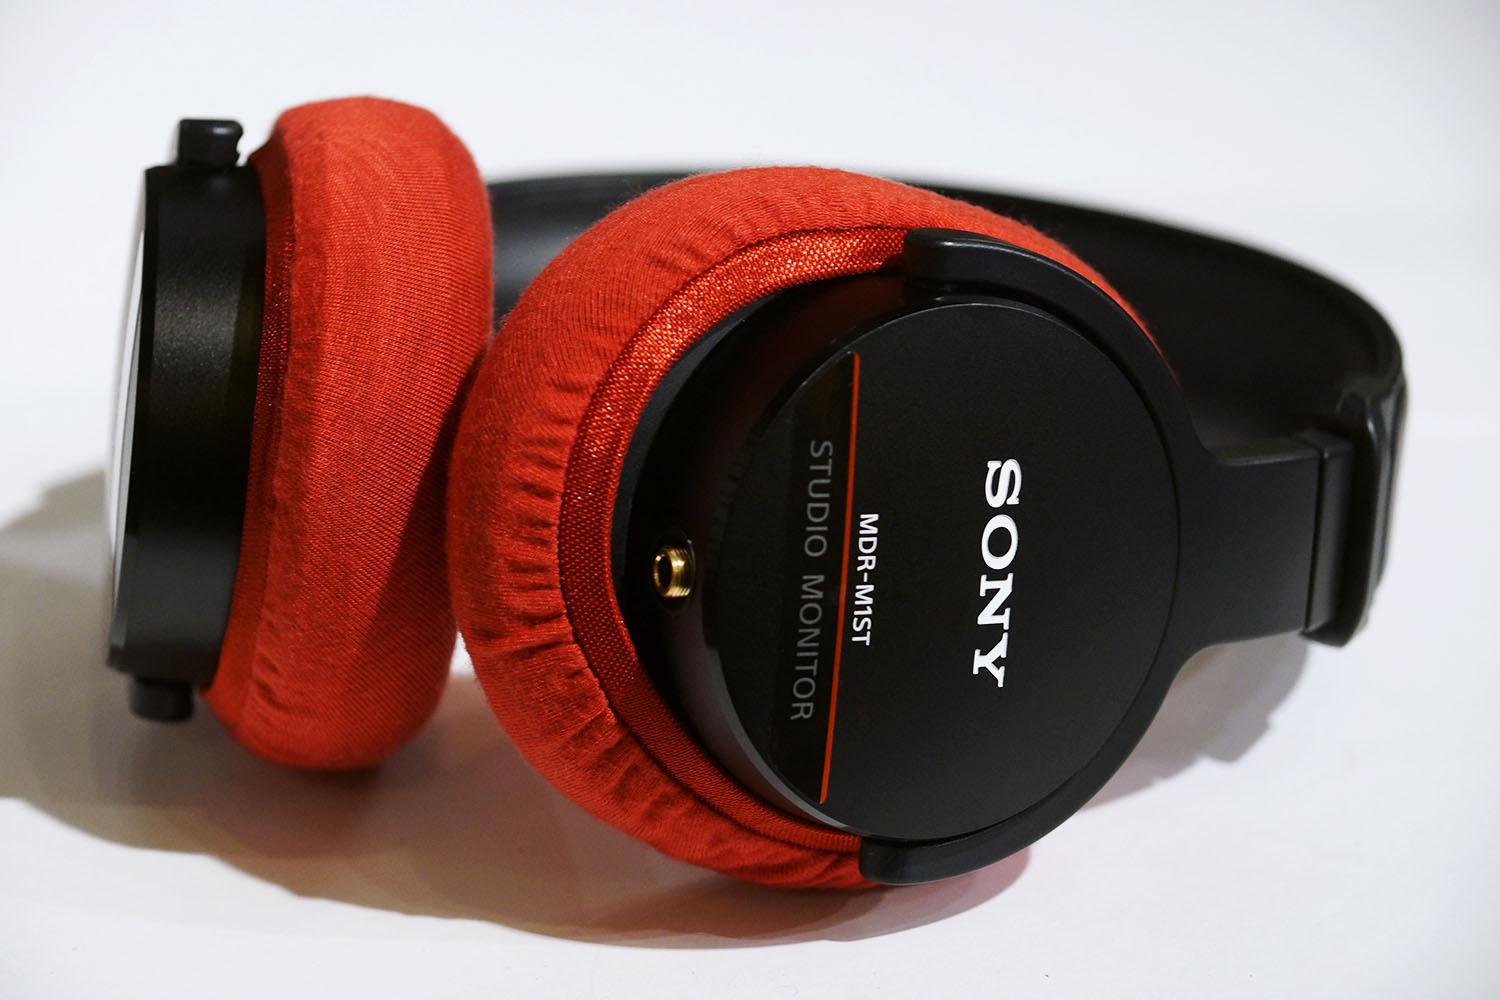 SONY MDR-M1ST earpad repair and protection: Super Stretch